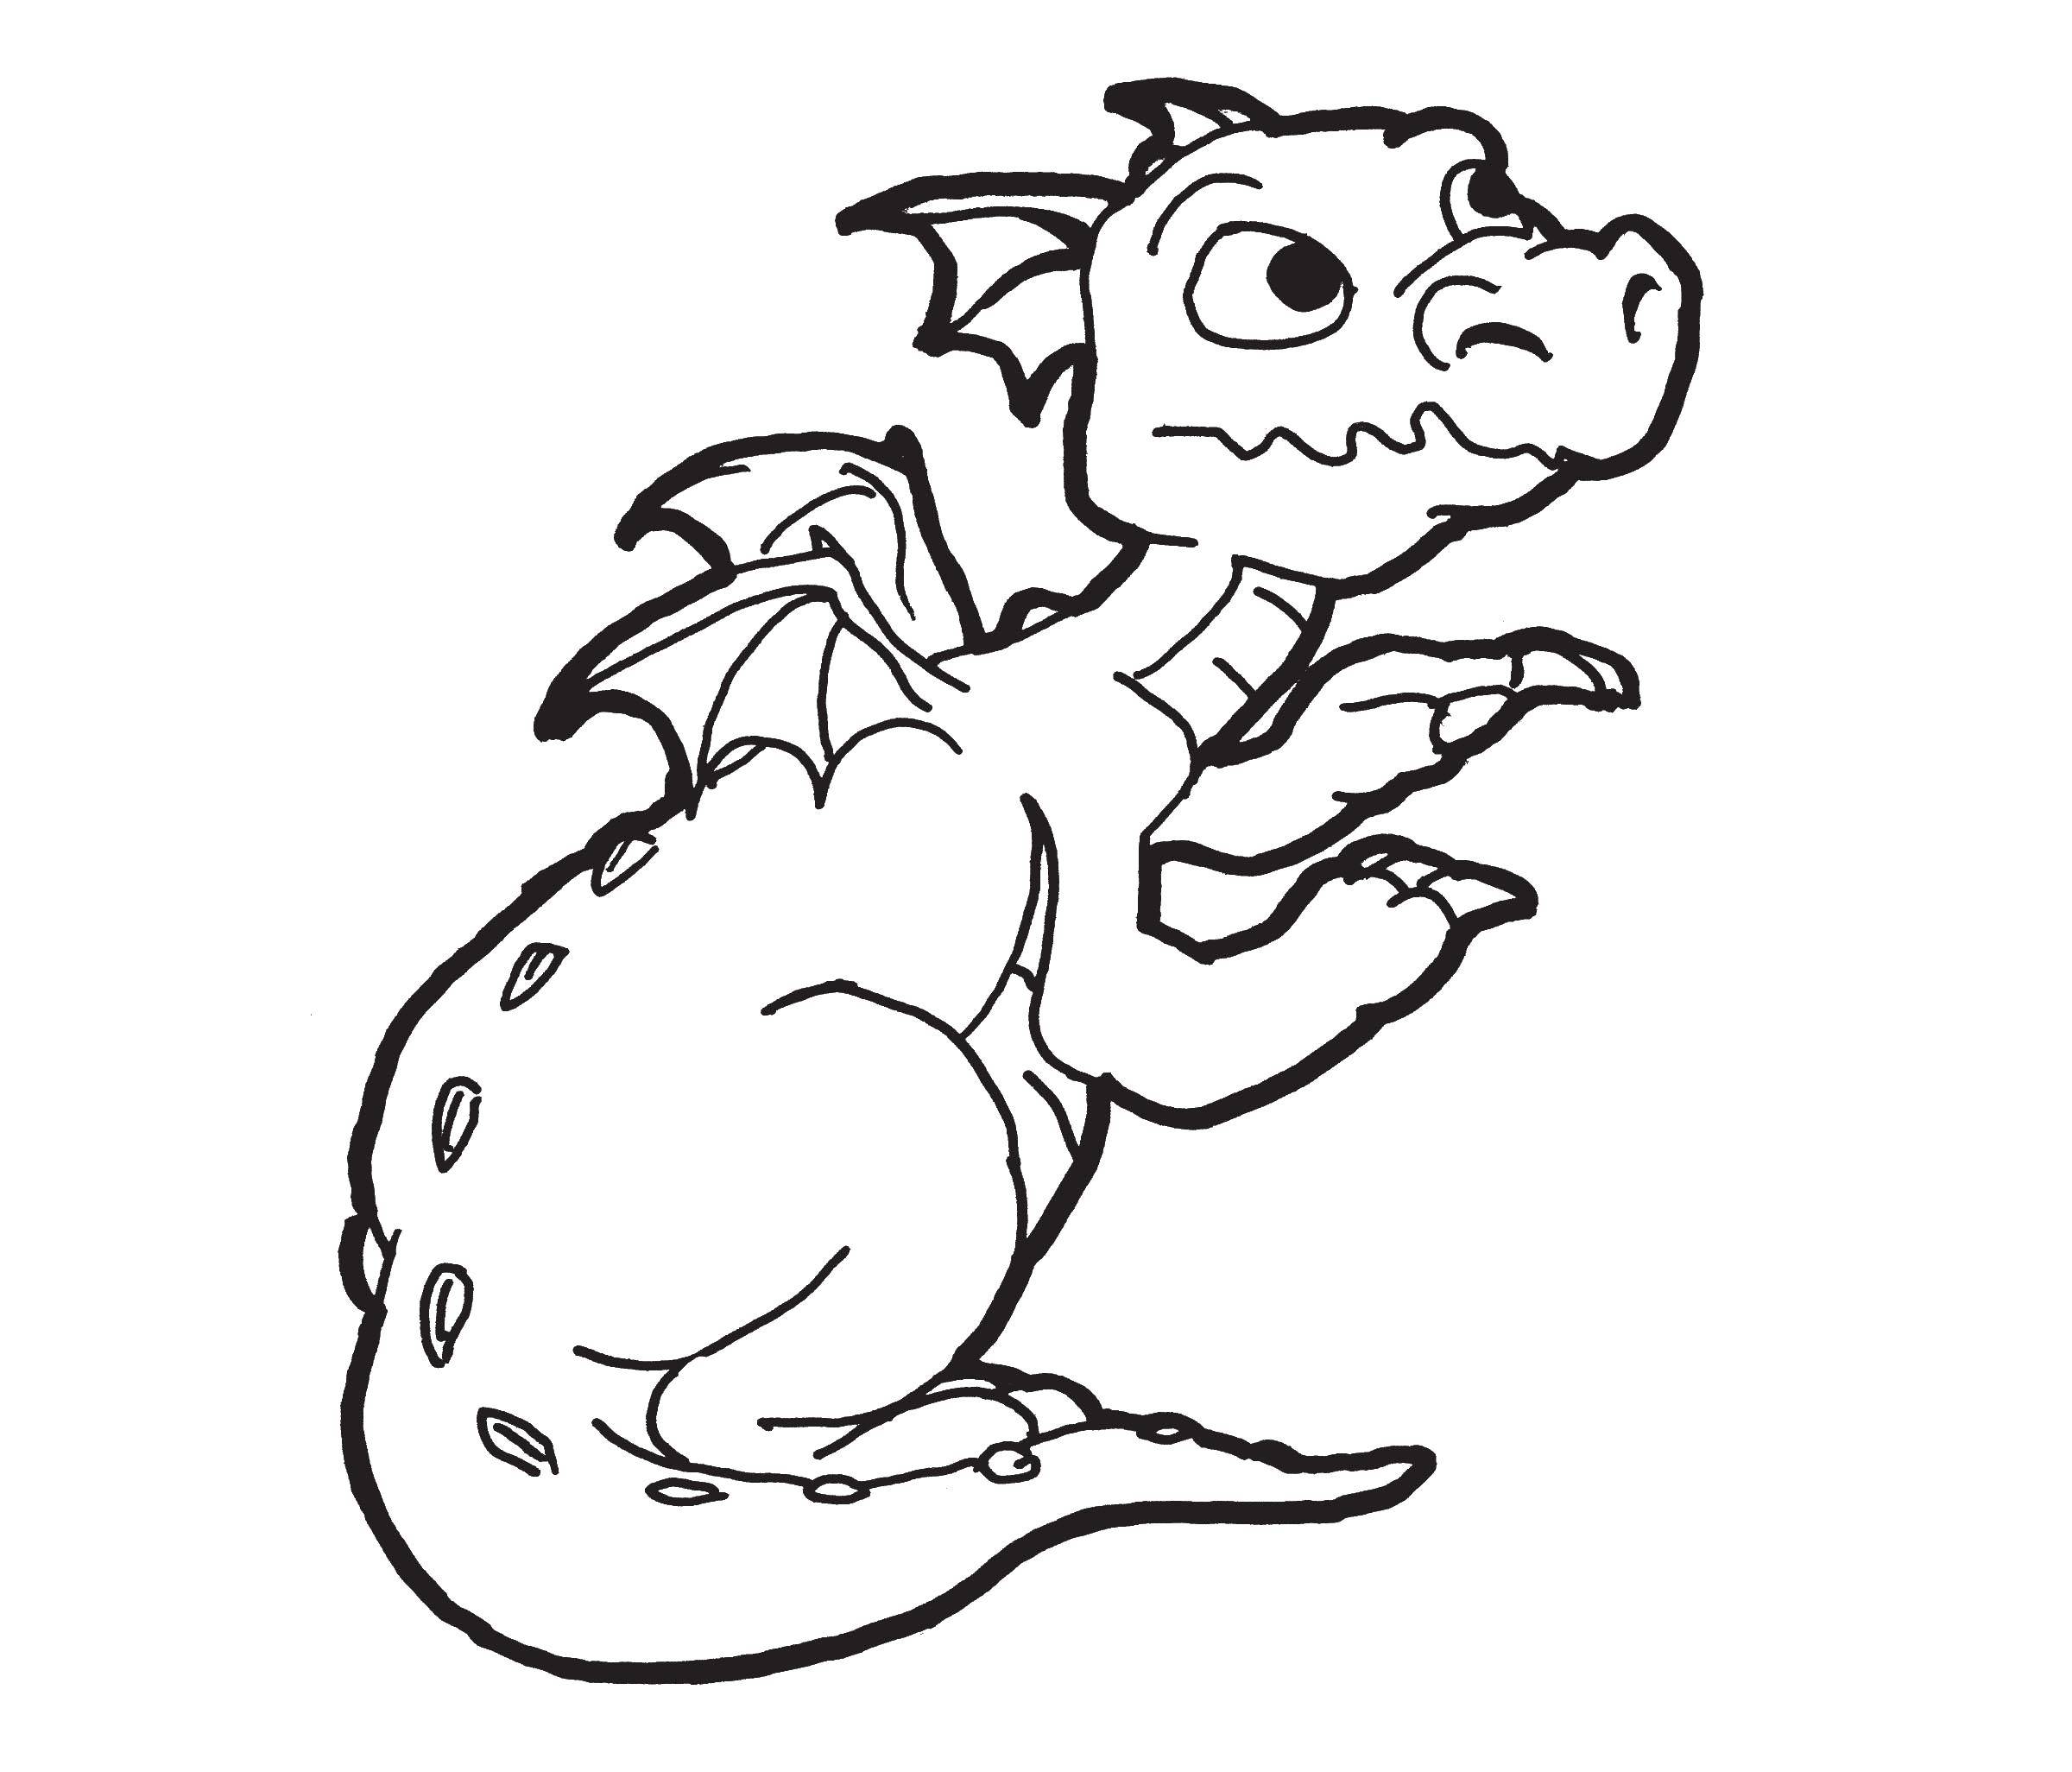 Coloring The little dragon.. Category Dragons. Tags:  dragons, dragon.